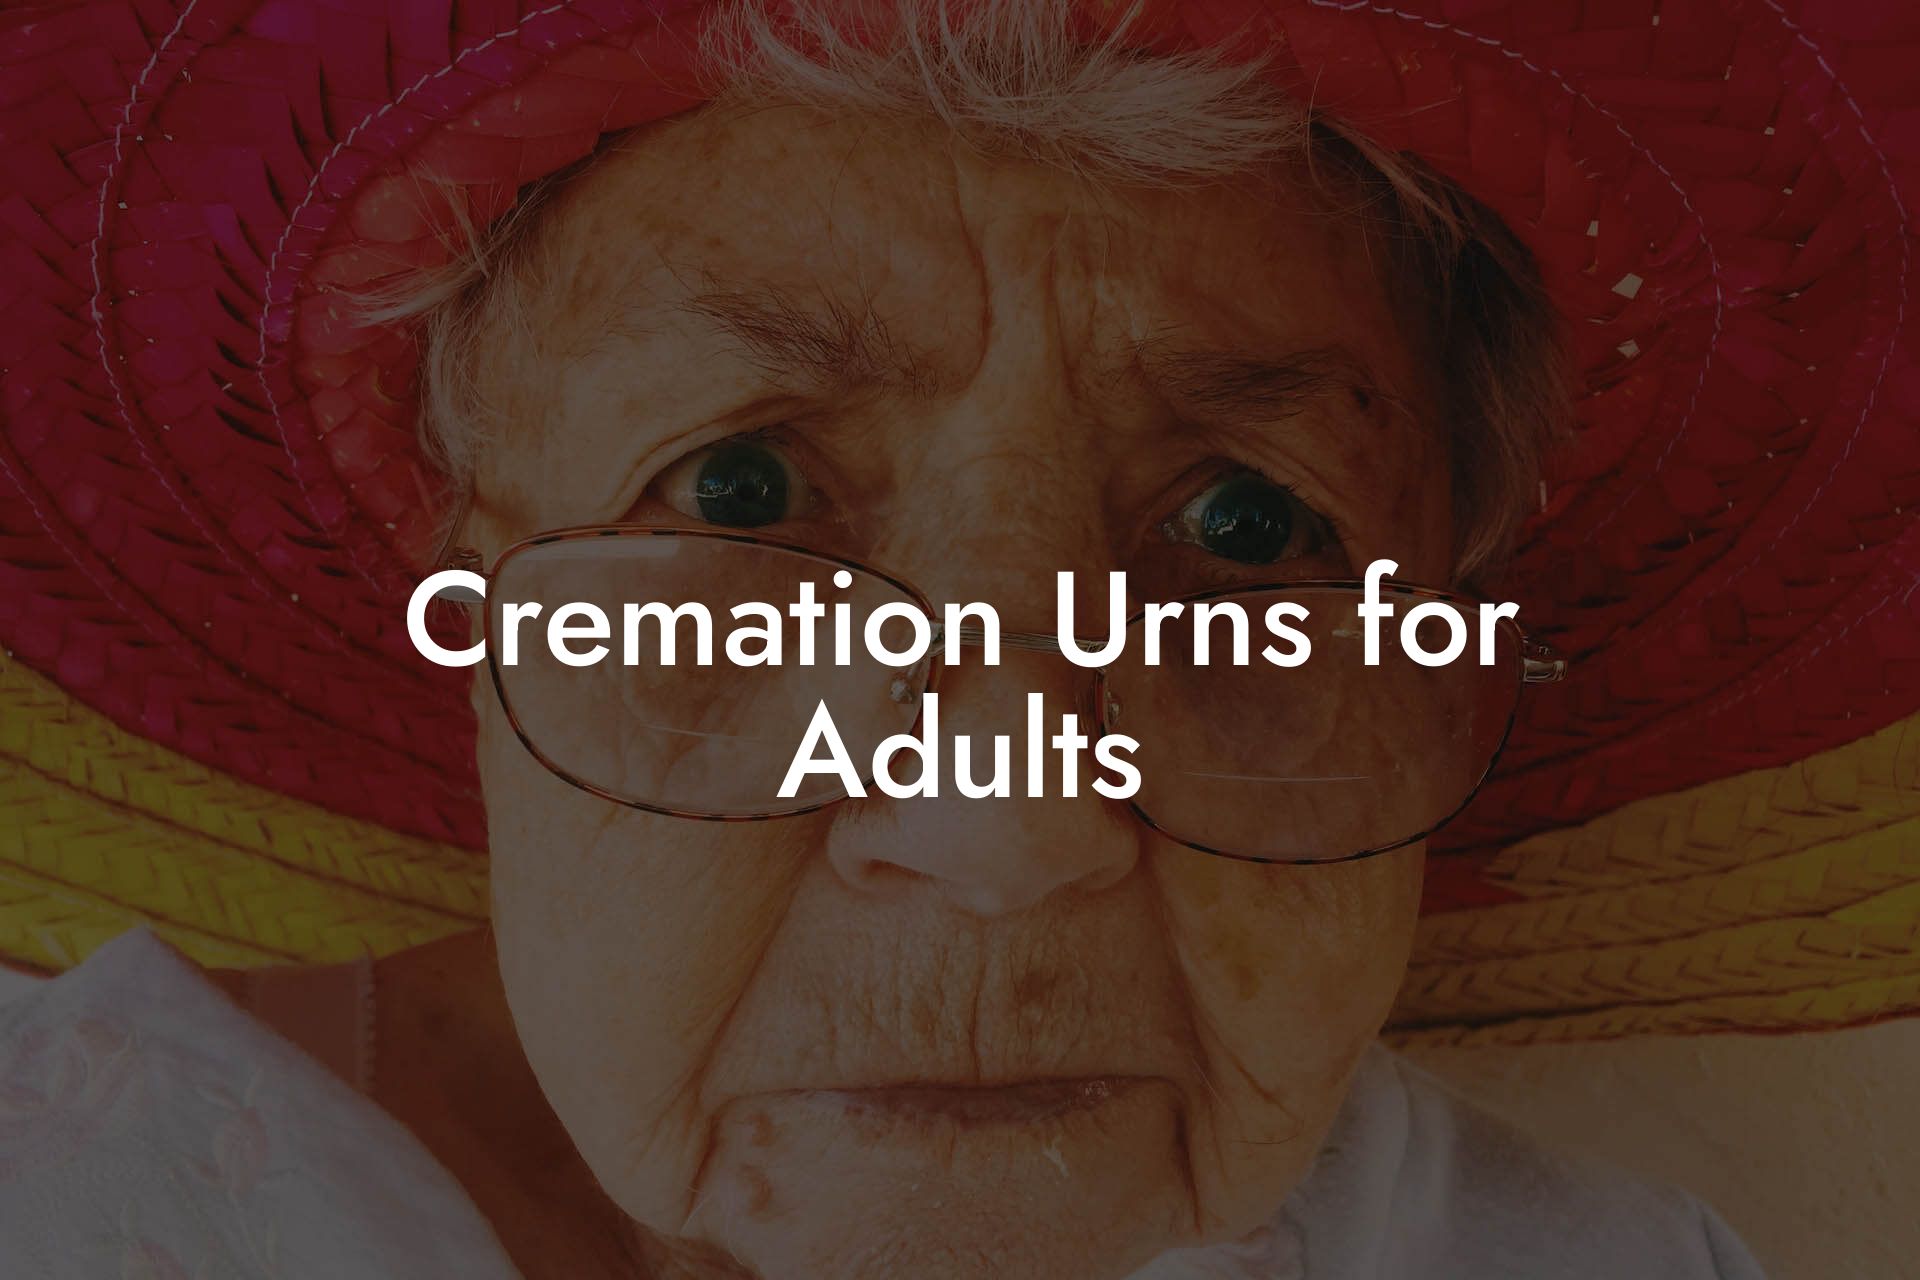 Cremation Urns for Adults